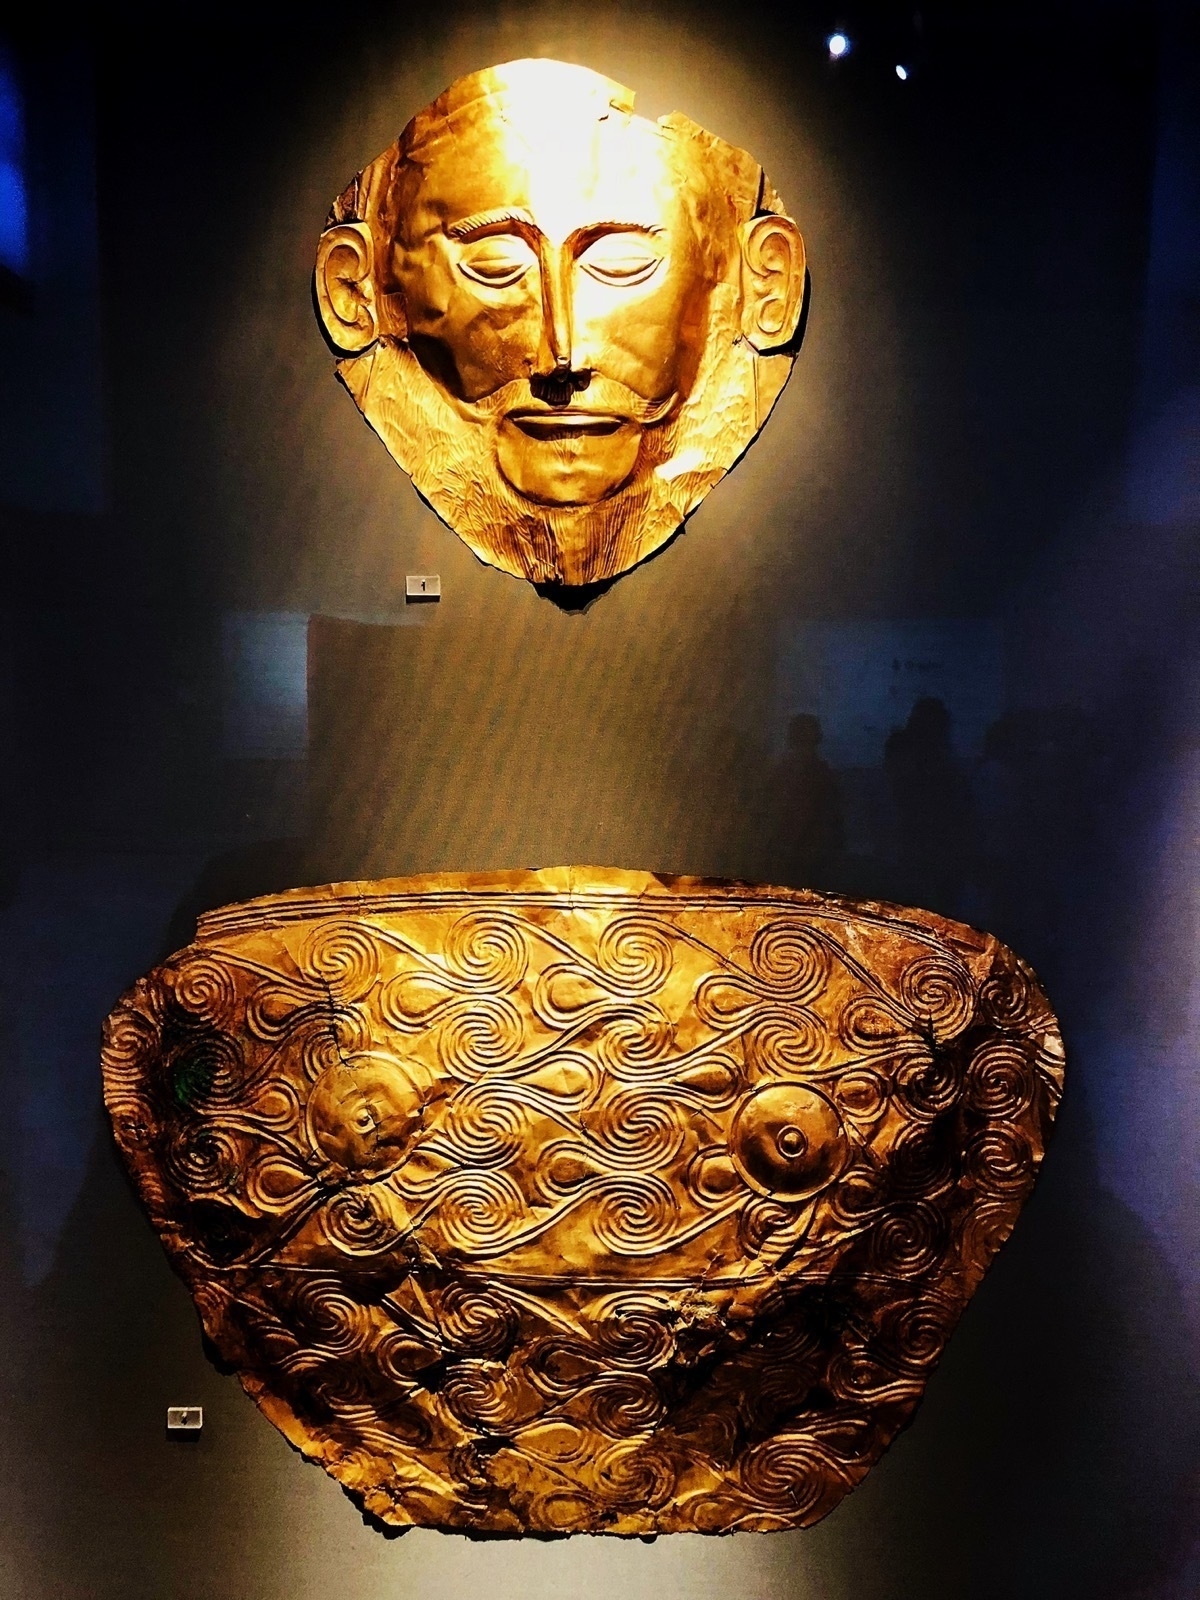 Shining gold mask of a bearded man above a decorative gold sheet chest piece, both mounted on a dark background